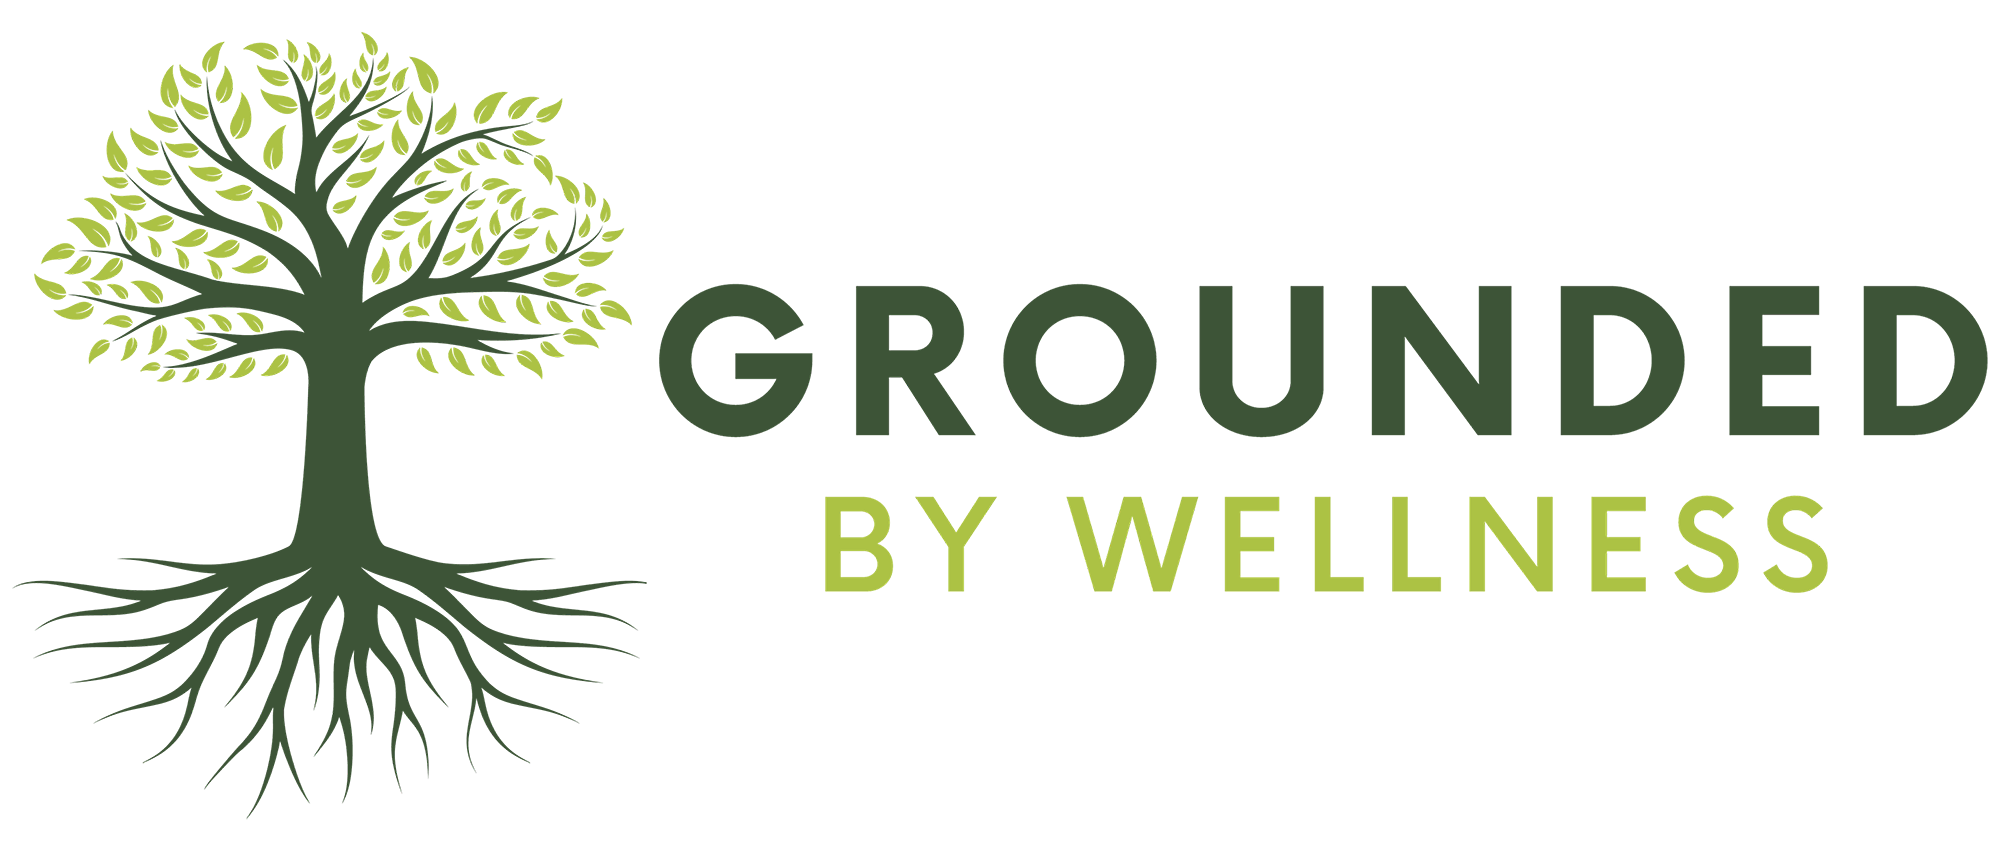 Grounded by Wellness